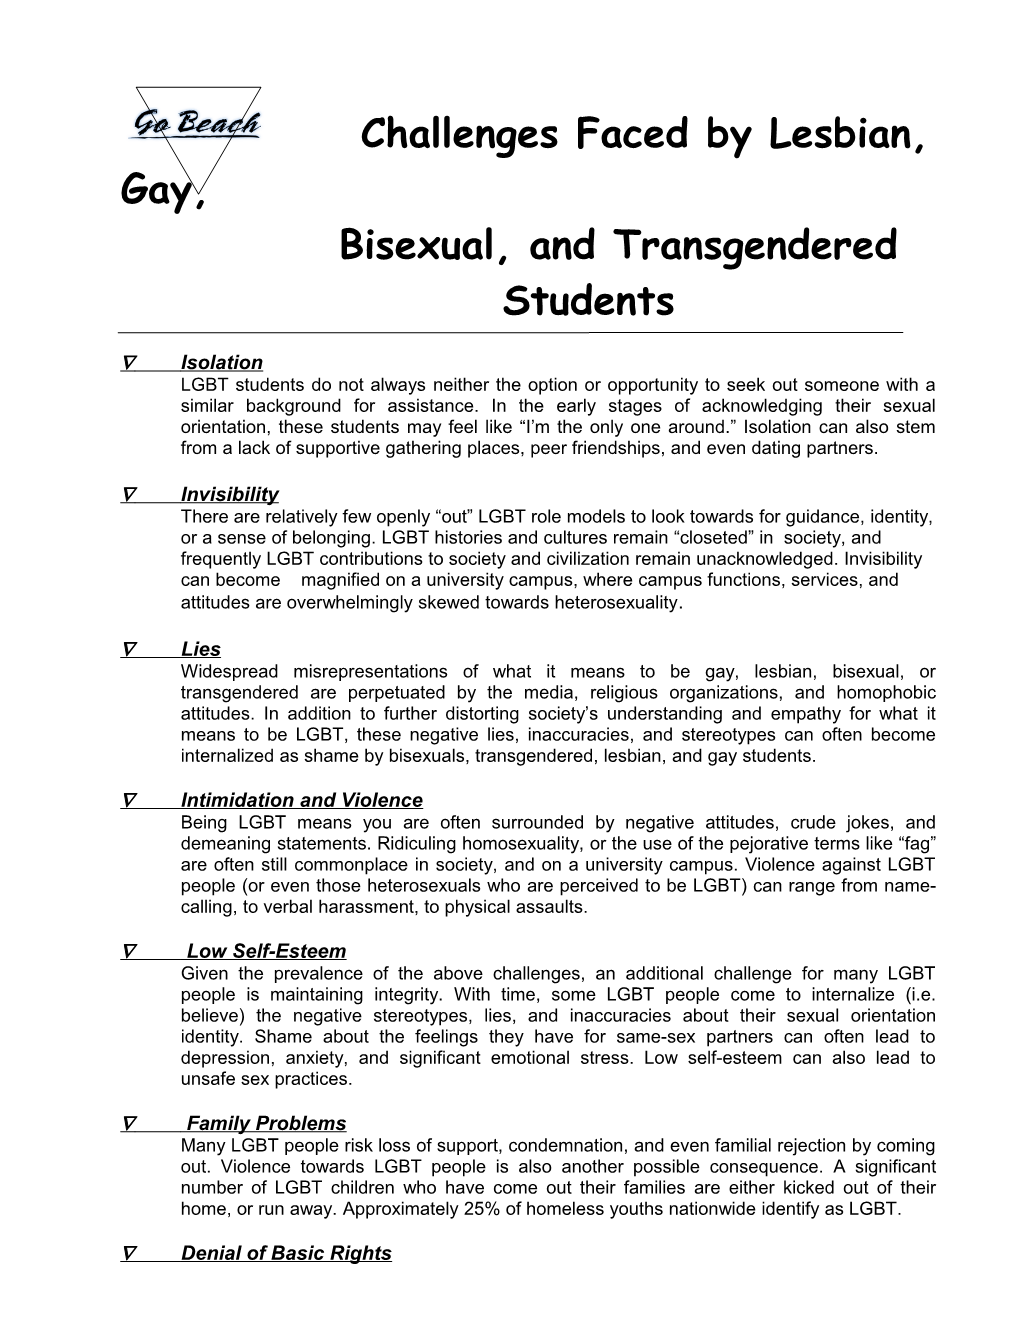 Bisexual, and Transgendered Students